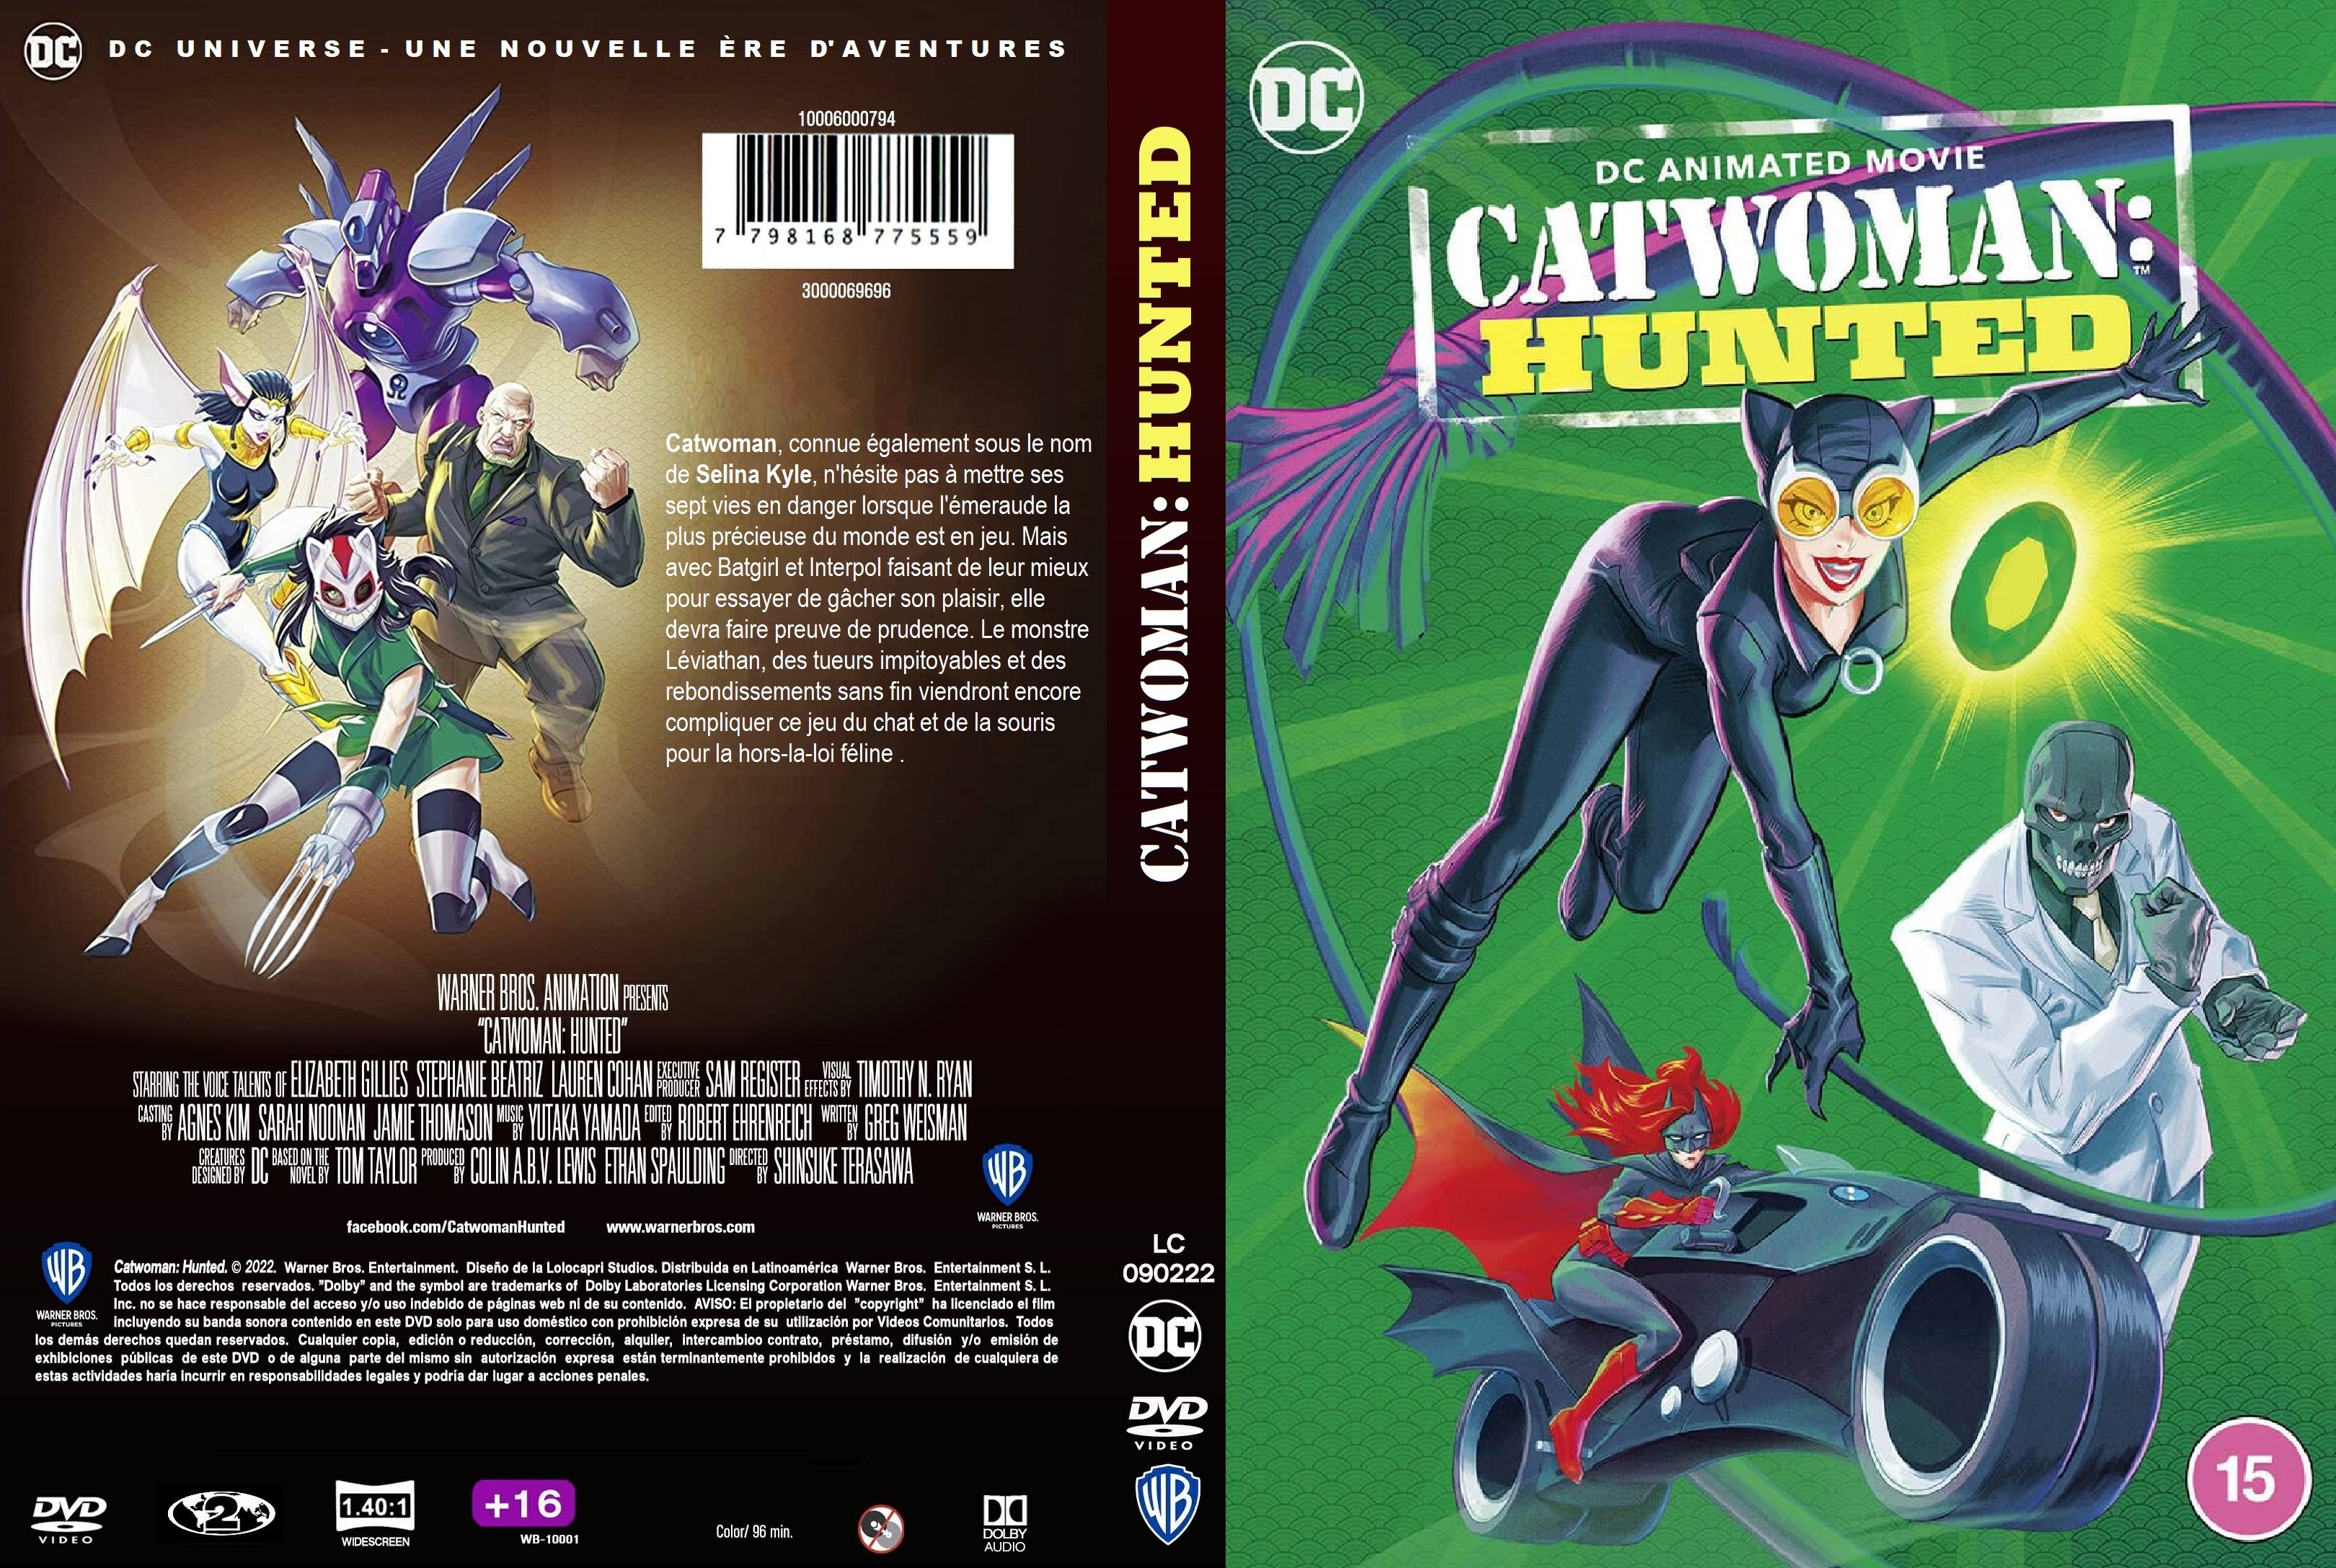 Jaquette DVD Catwoman Hunted custom v2